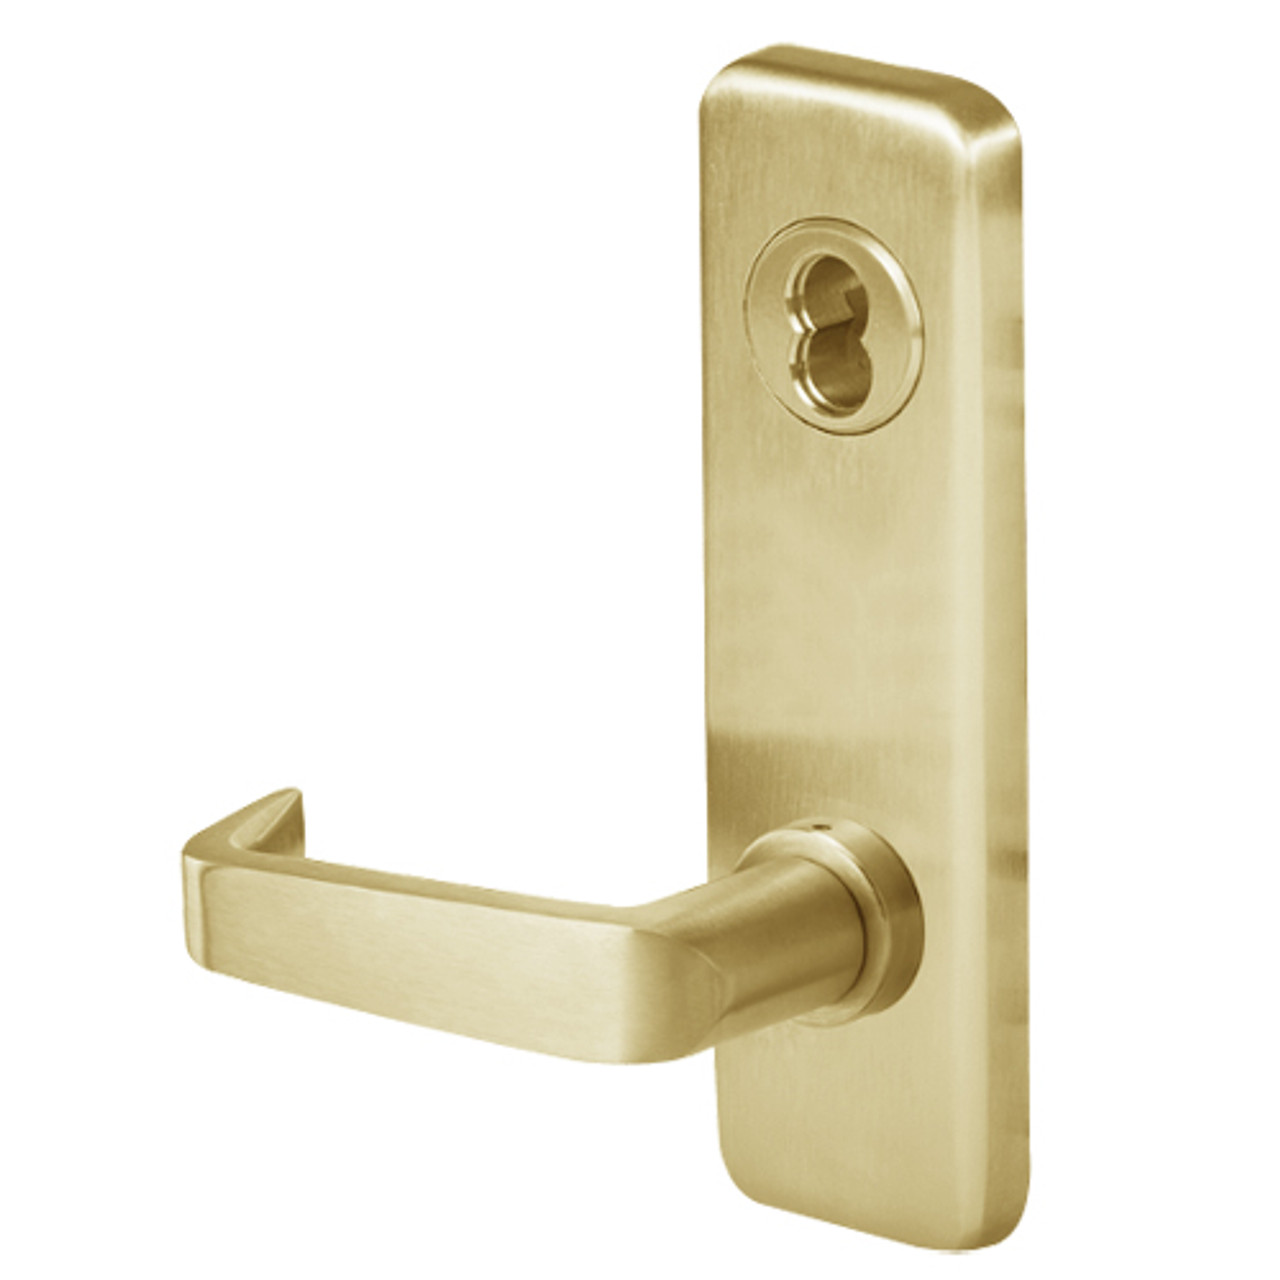 45HW7TWEL15J606RQE Best 40HW series Double Key Deadbolt Fail Safe Electromechanical Mortise Lever Lock with Contour w/ Angle Return Style in Satin Brass